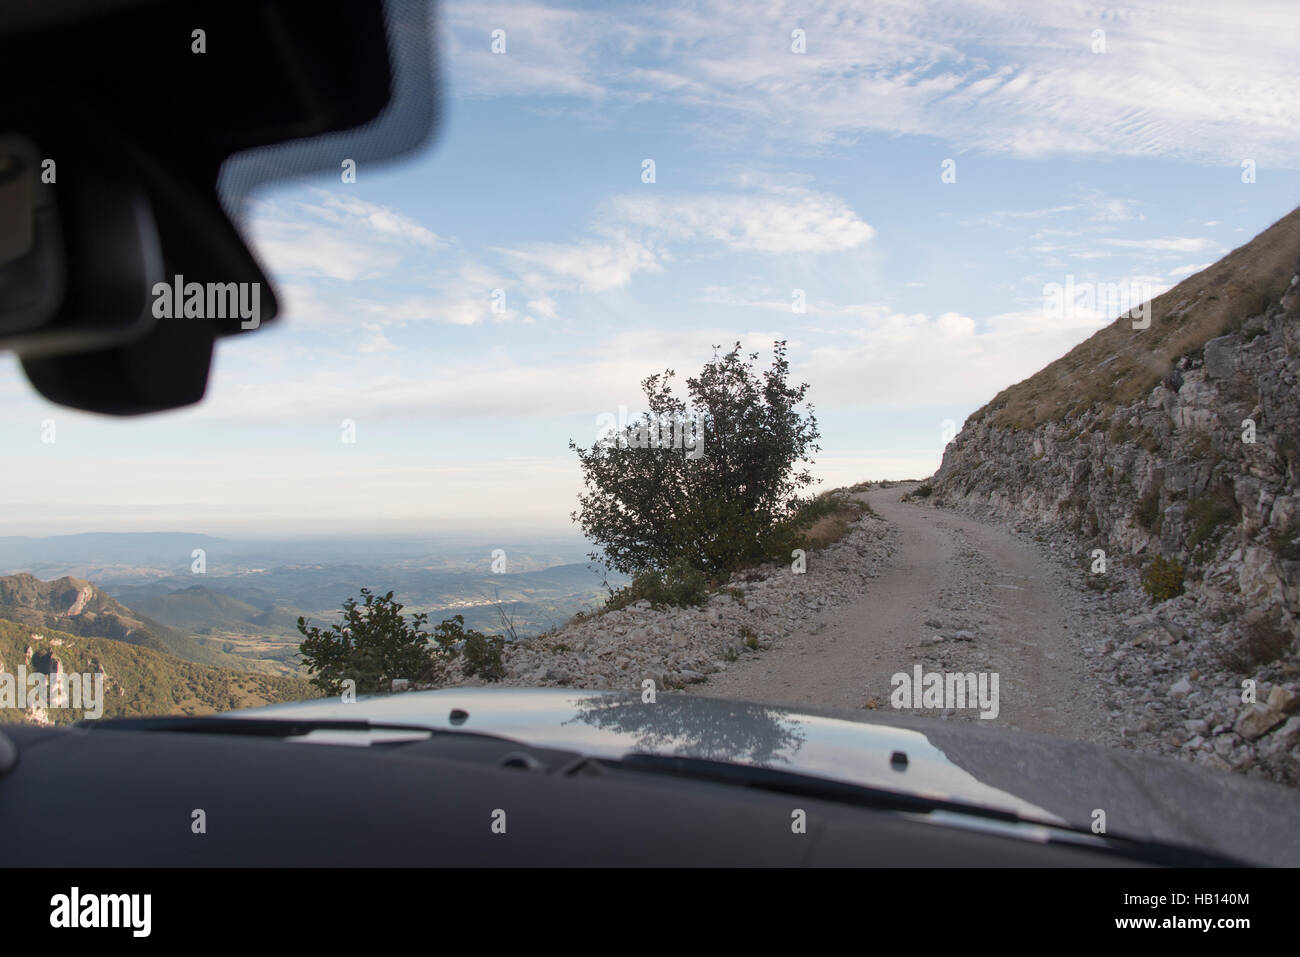 View through the front windscreen of a Land Rover Discovery as it heads up a steep mountain road Stock Photo